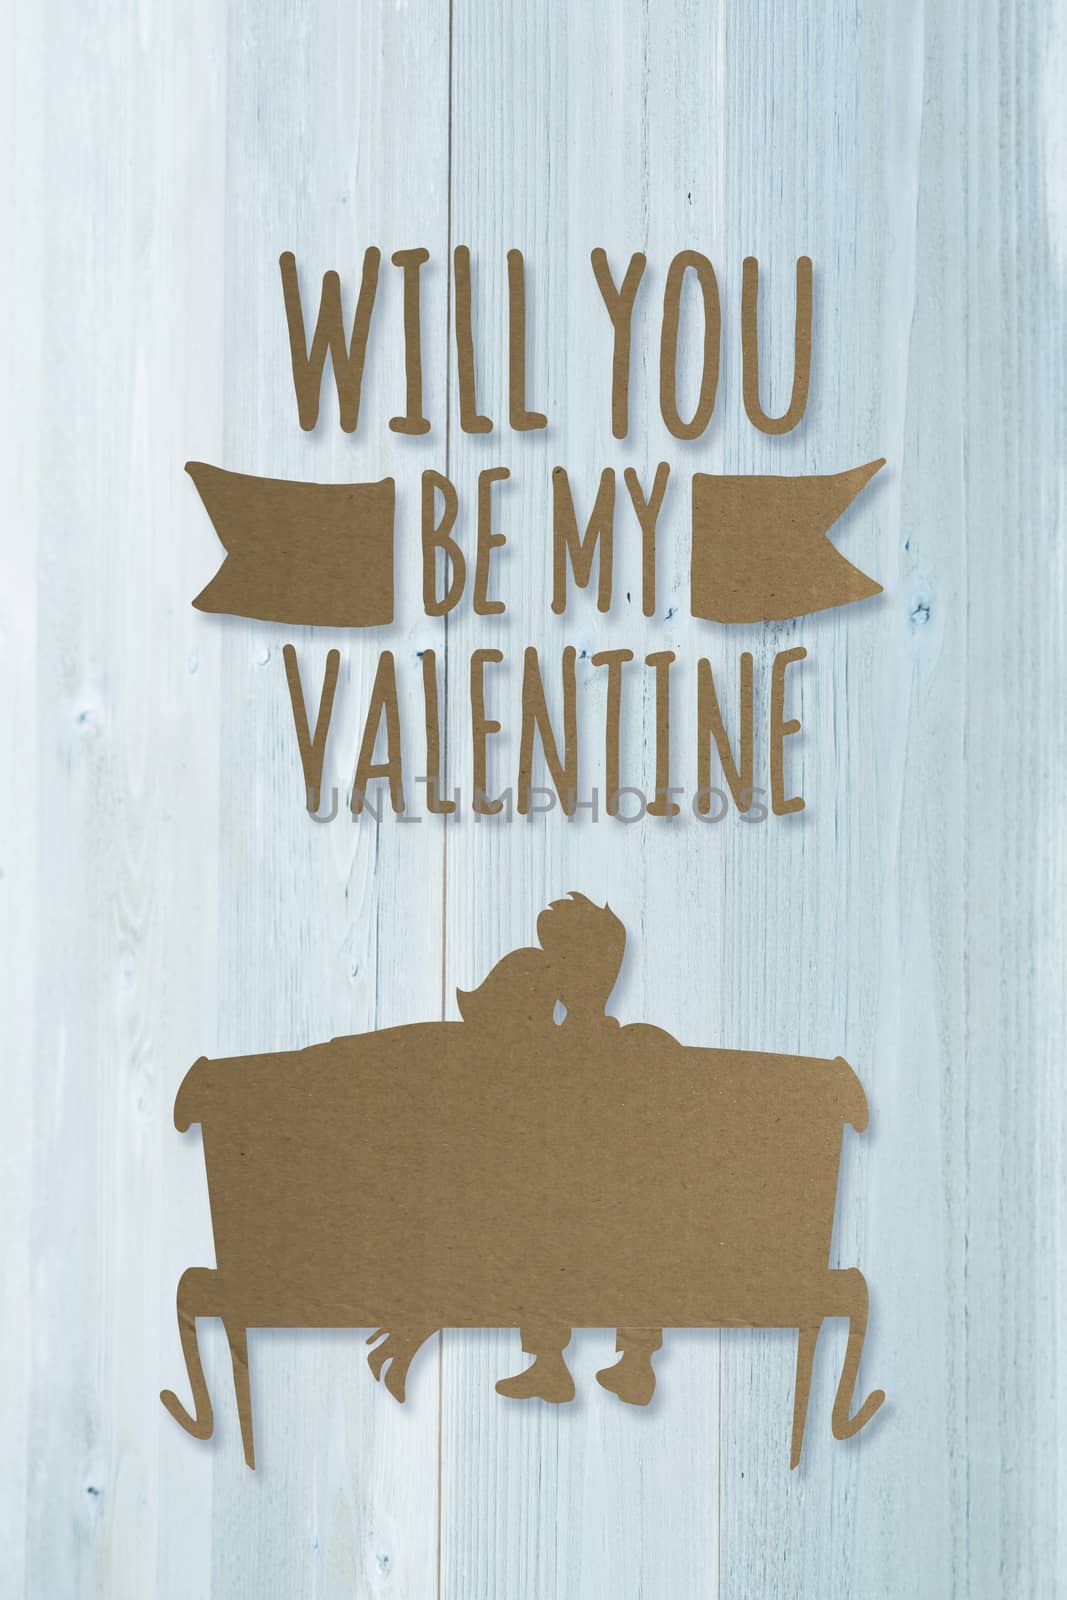 Cute valentines message against bleached wooden planks background